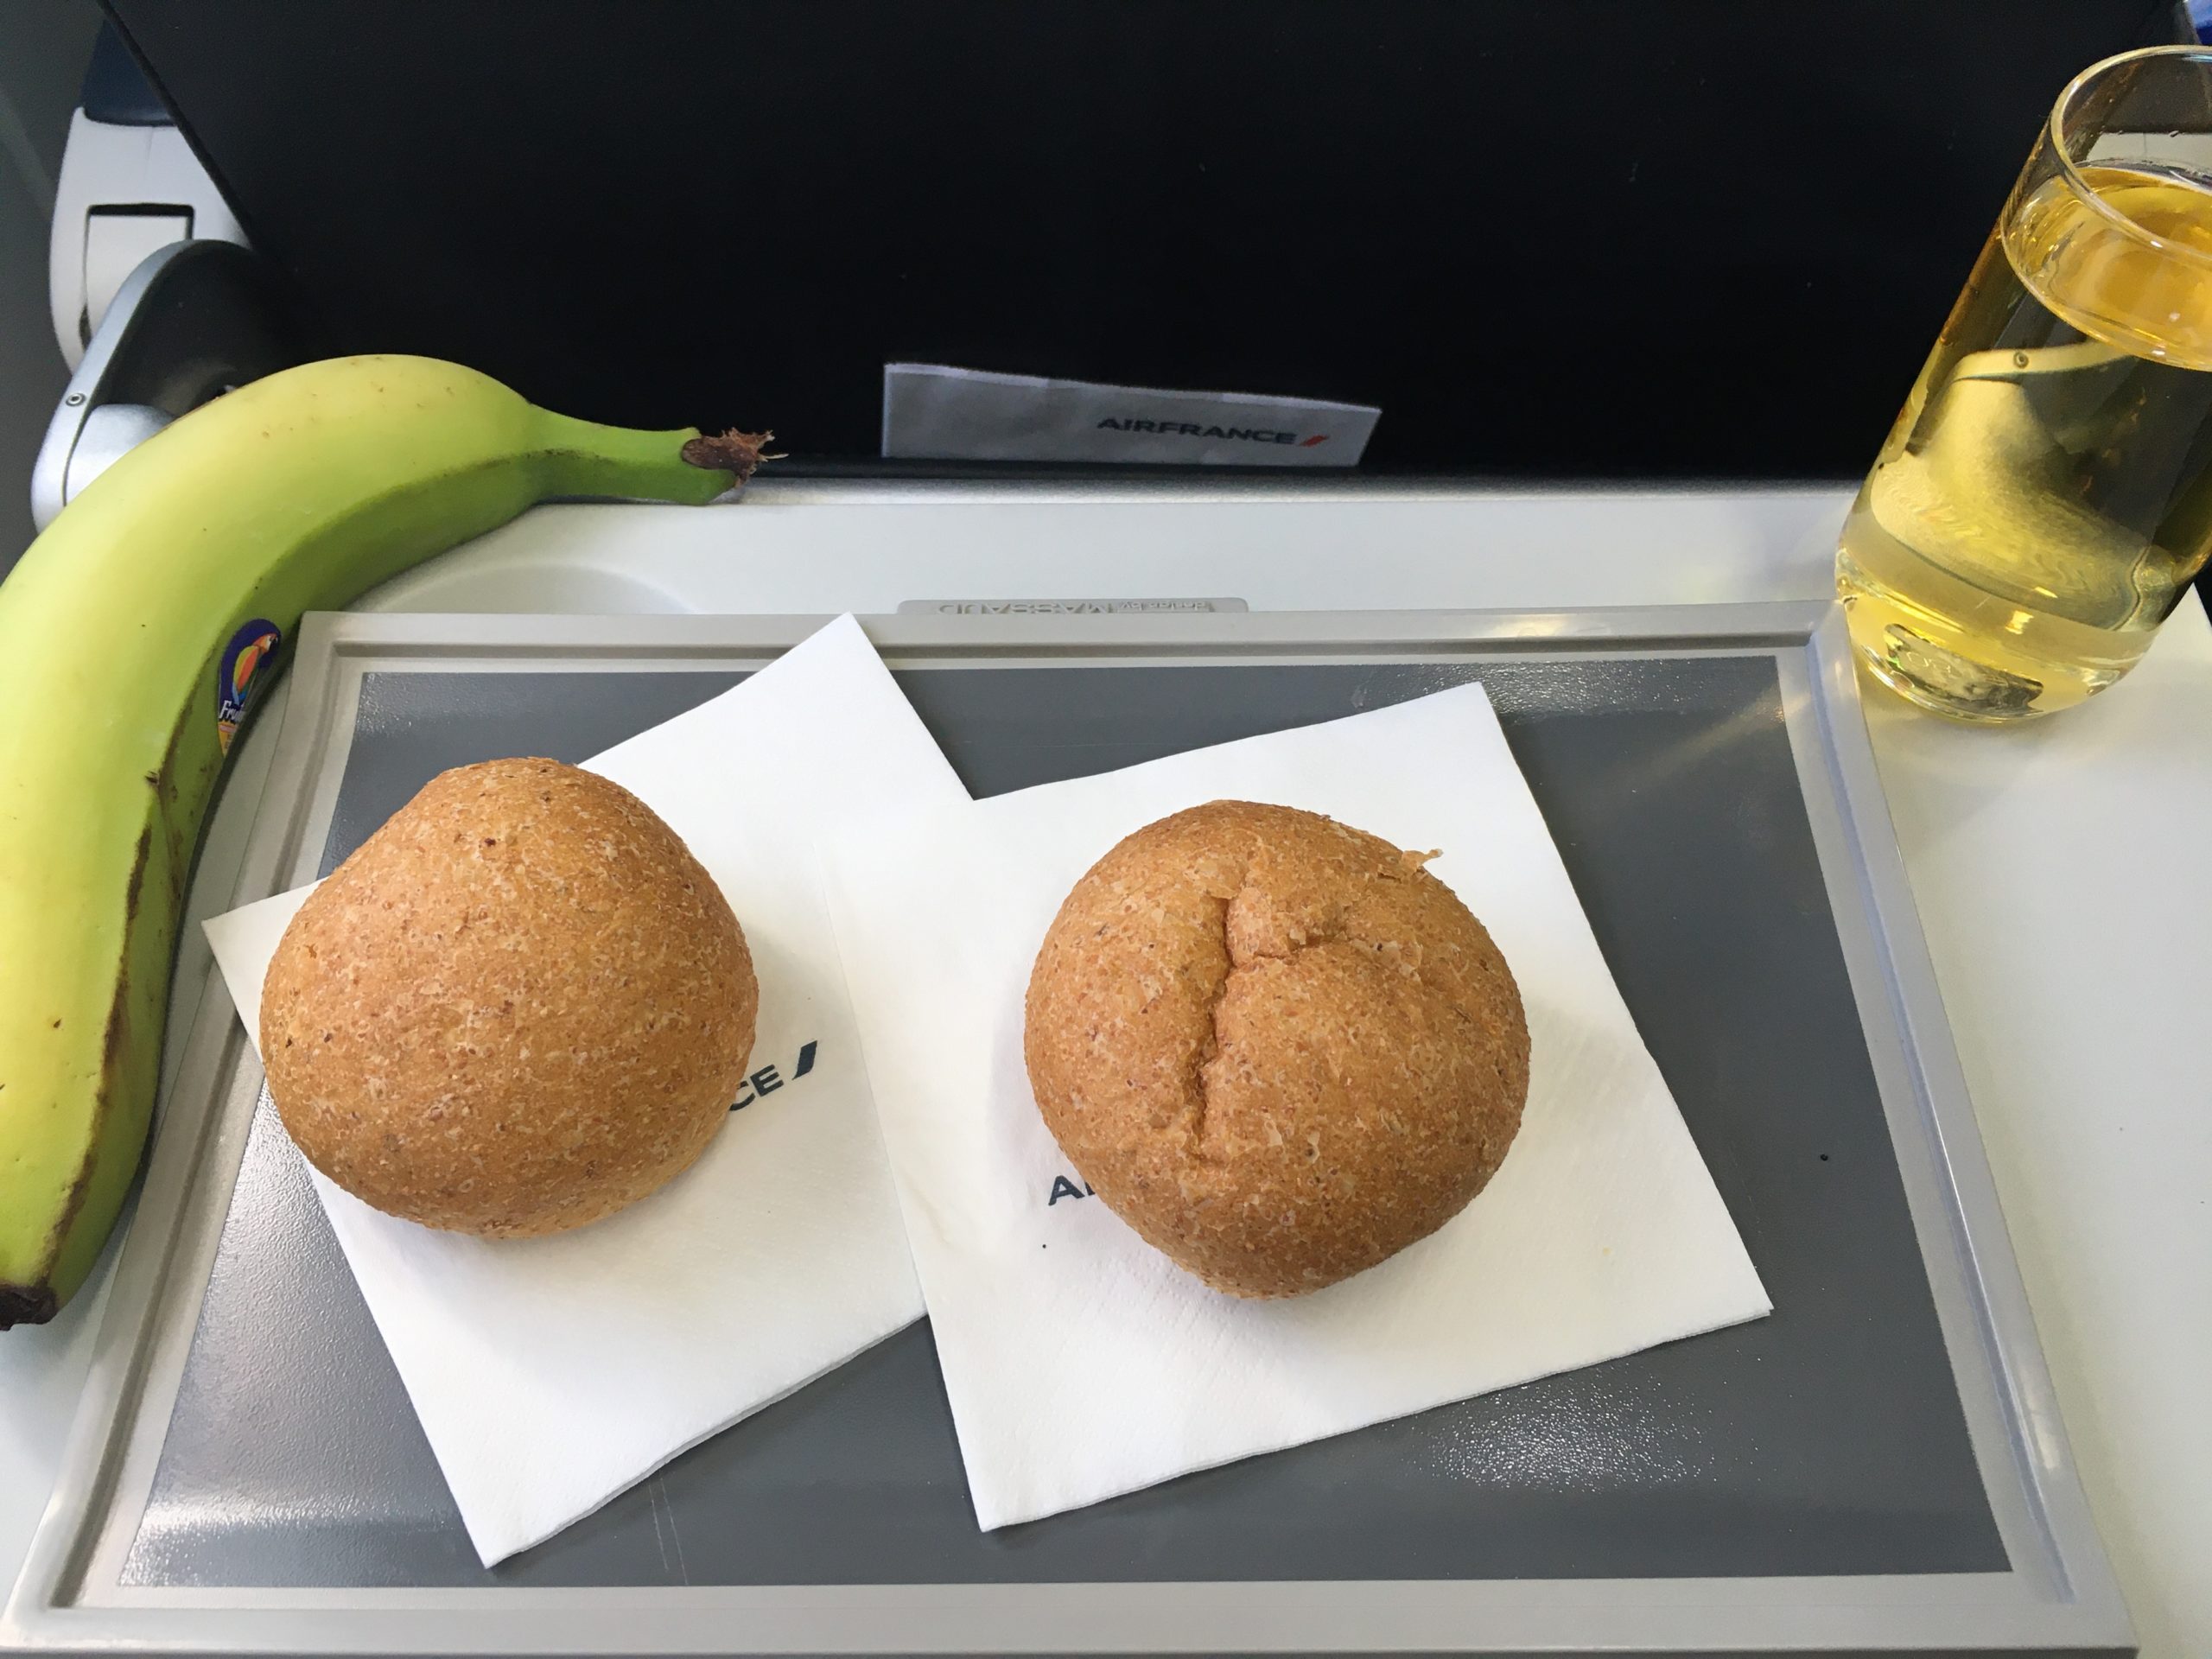 Air France staff found rolls & a banana so I wouldn't go hungry